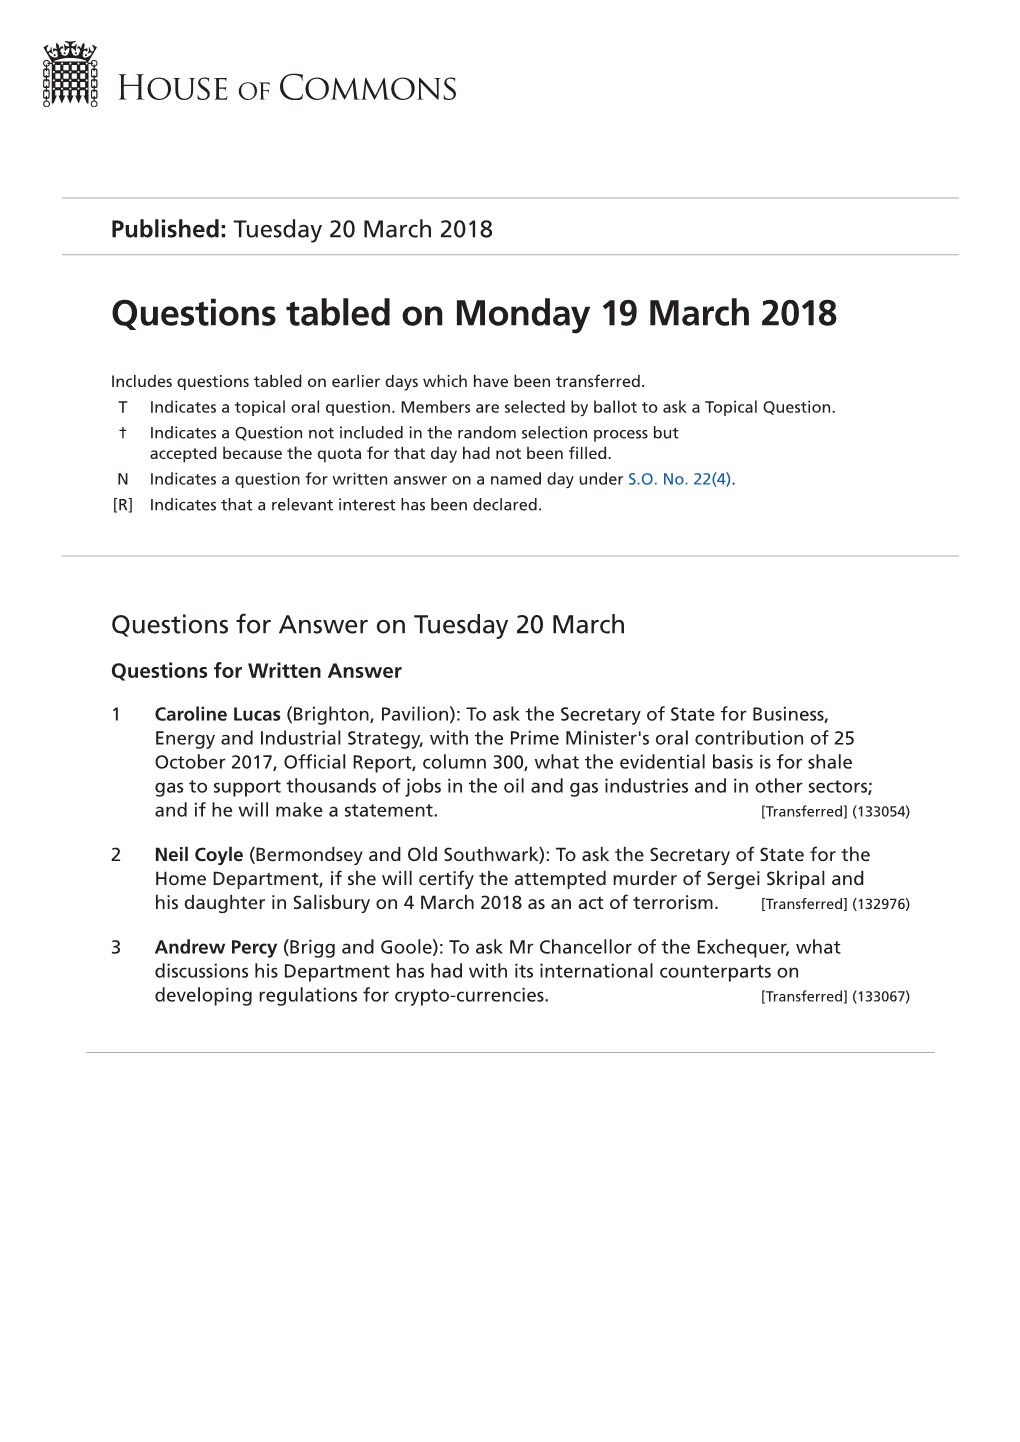 Questions Tabled on Mon 19 Mar 2018